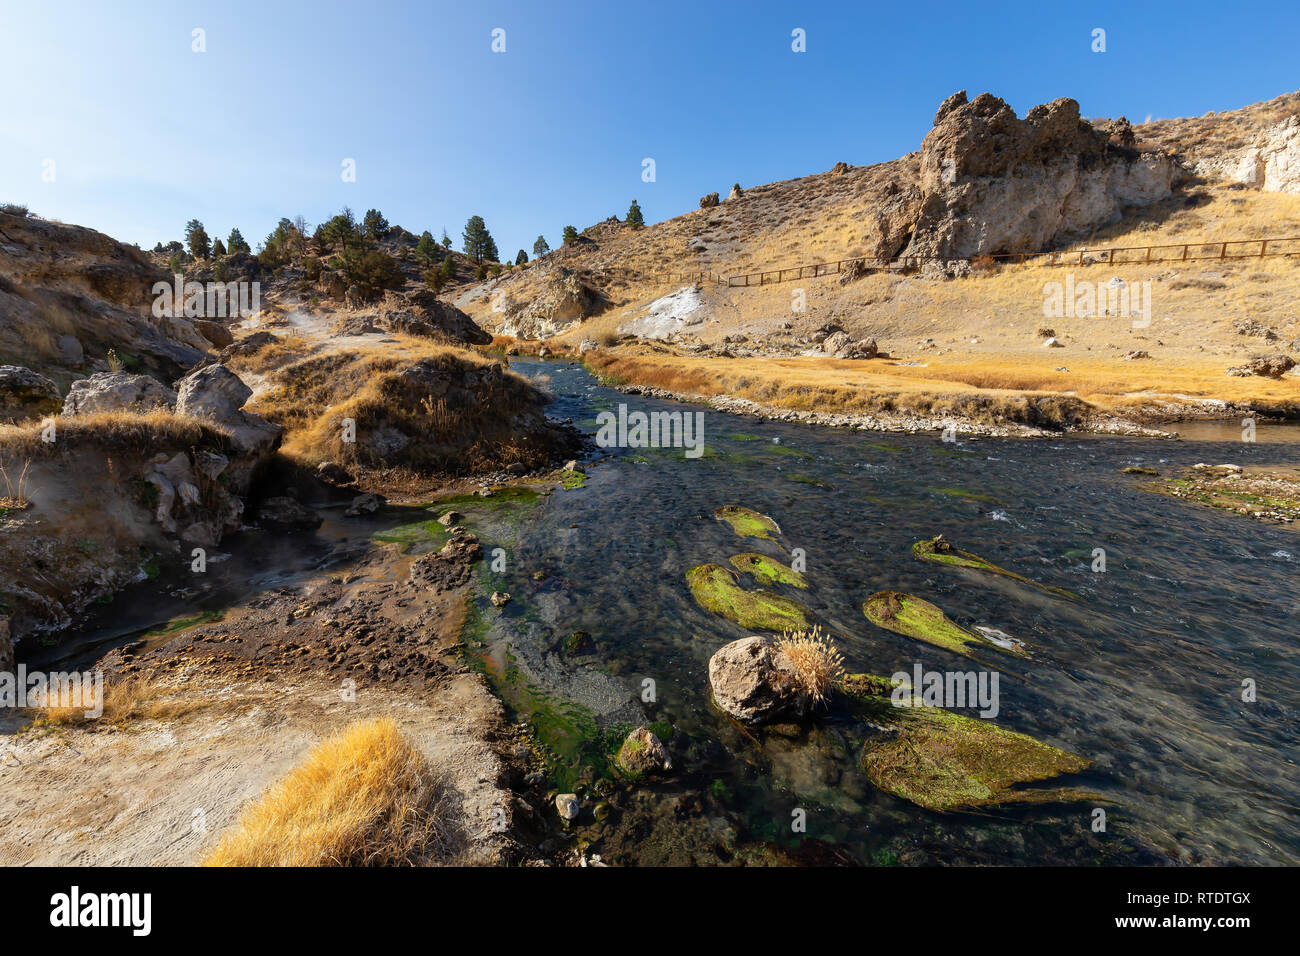 View Of Natural Hot Springs At Hot Creek Geological Site Located Near